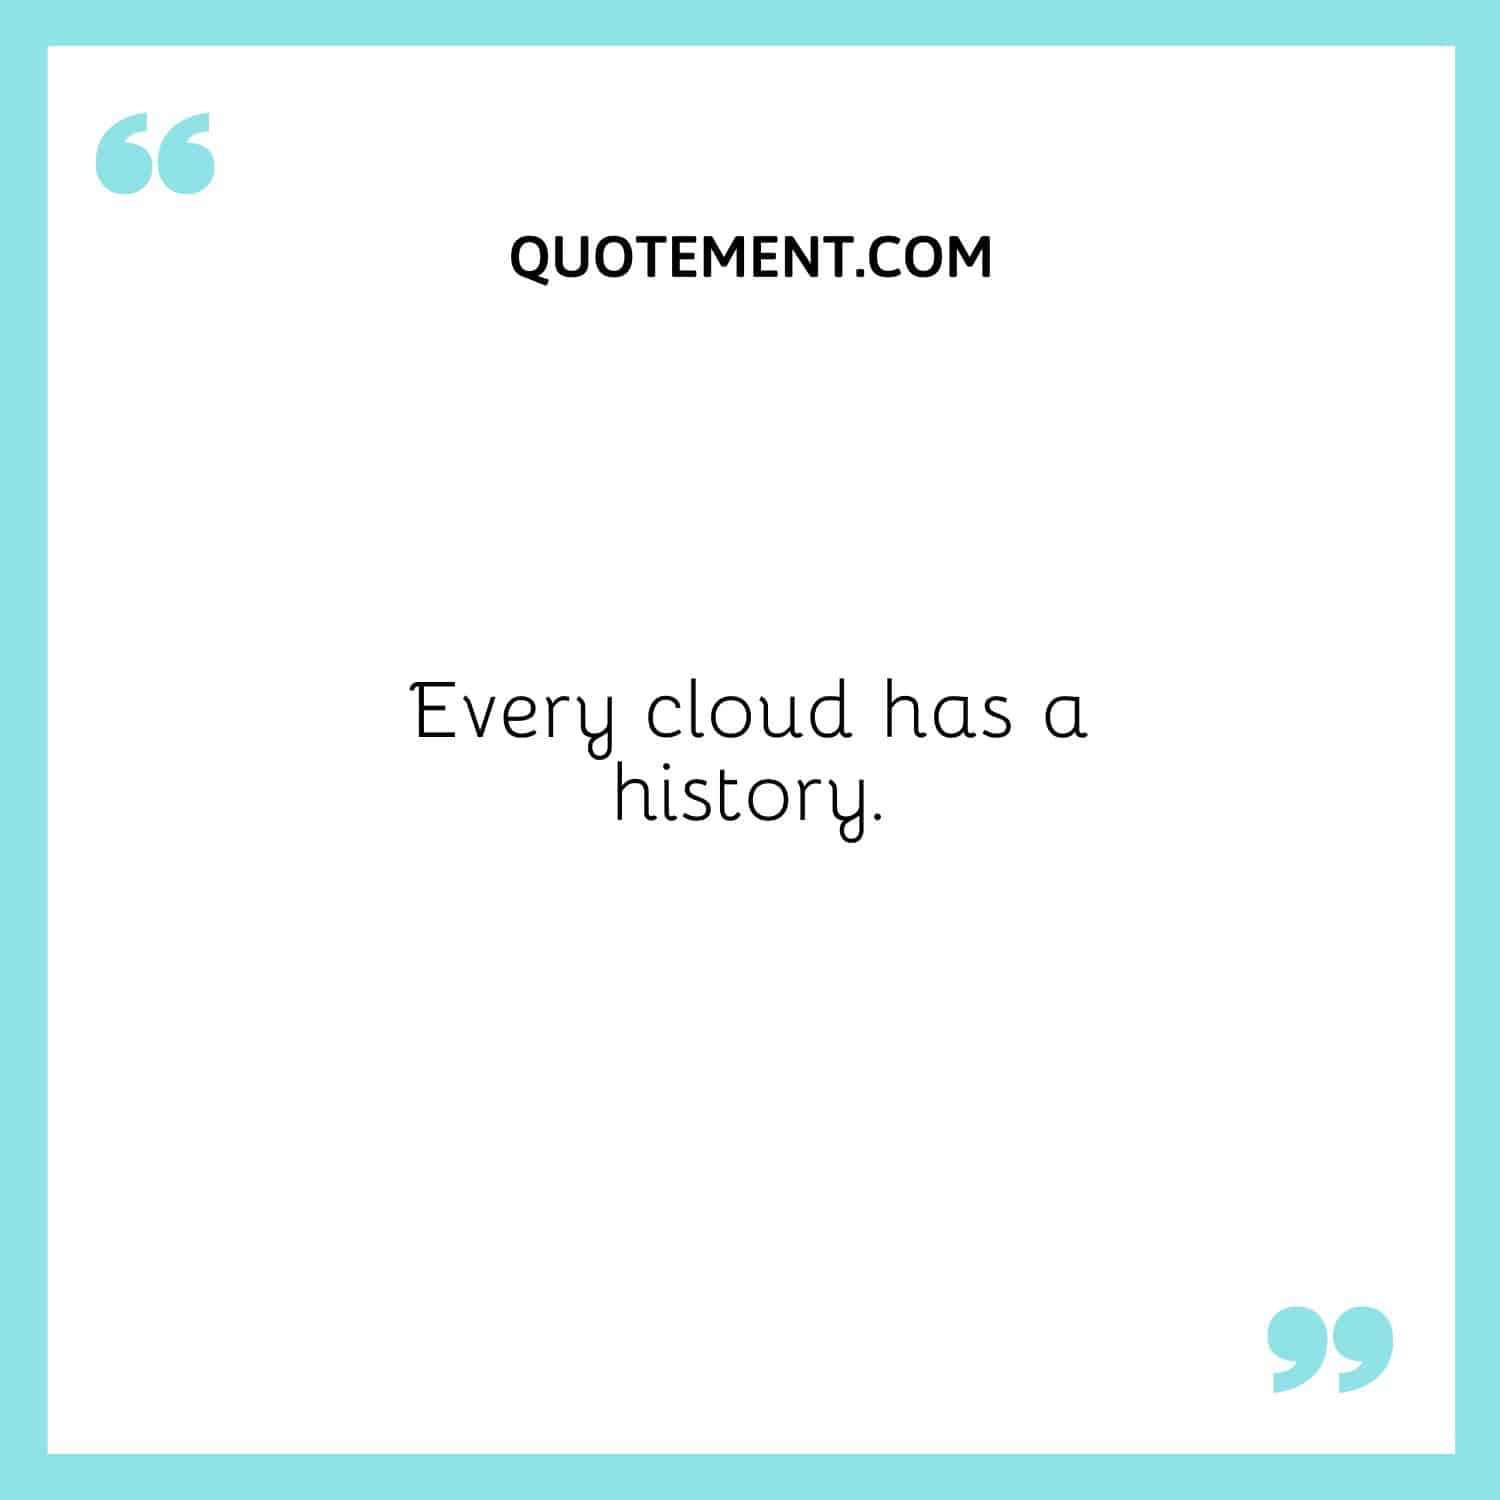 Every cloud has a history.